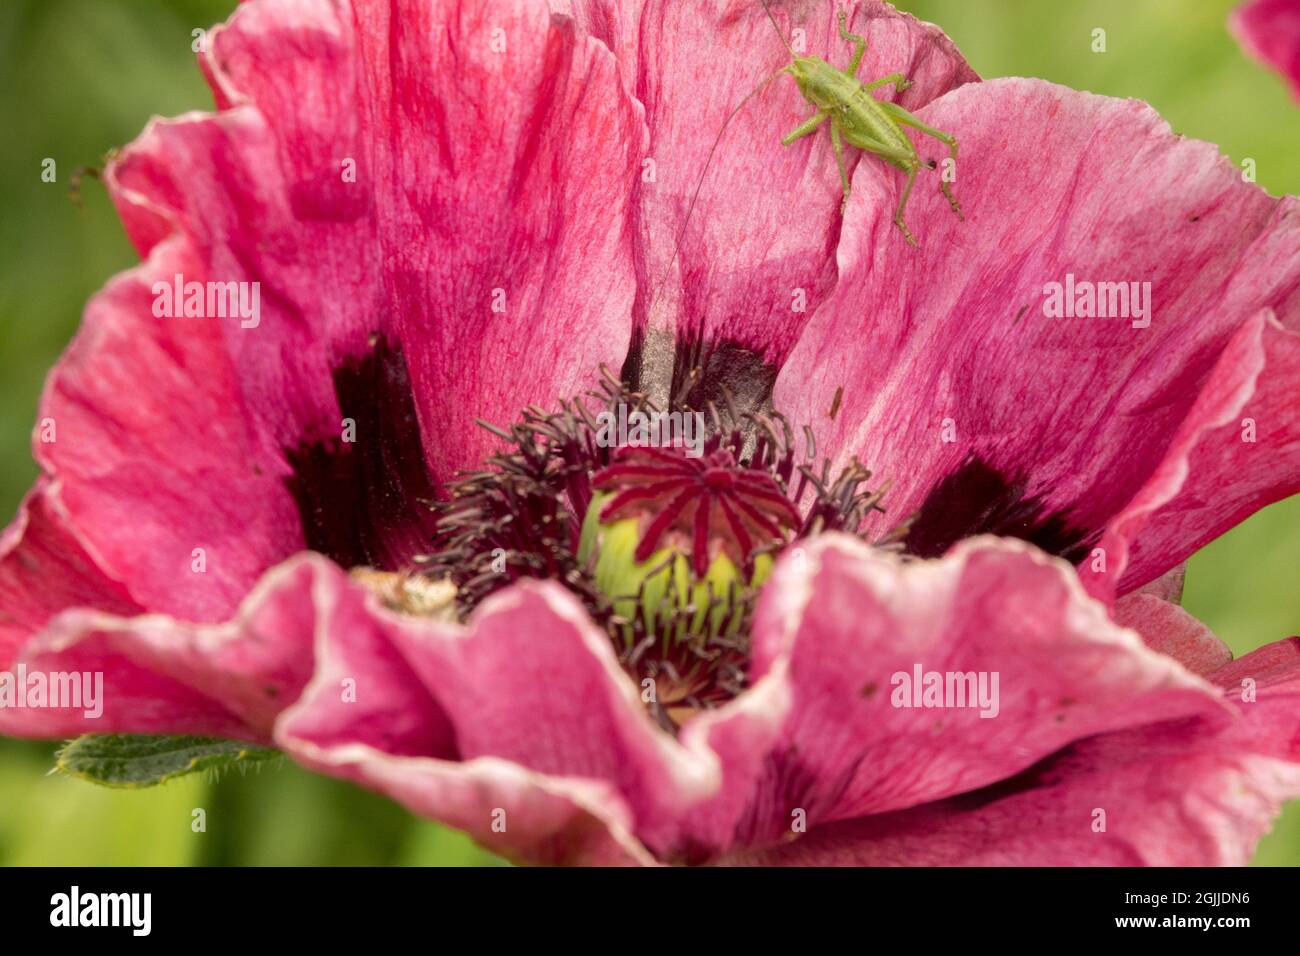 Insect on flower Orientale Papaver 'Pattys Plum' young nymph of bush-cricket Stock Photo